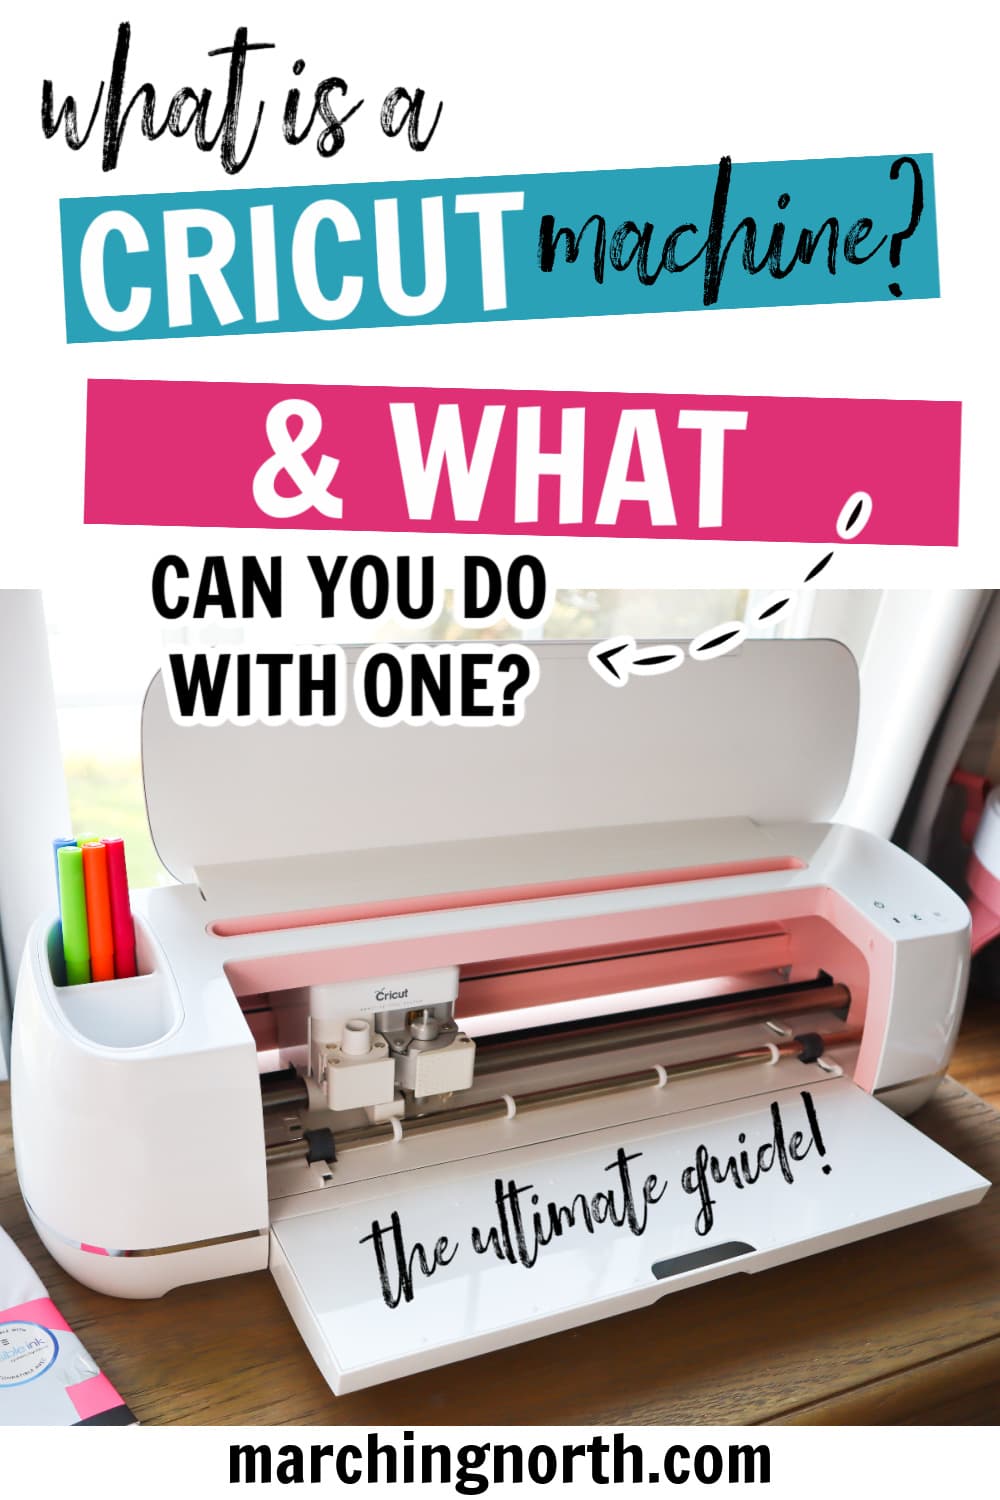 GUIDE TO USING THE CRICUT EXPLORE 3 - Let's Craft Instead